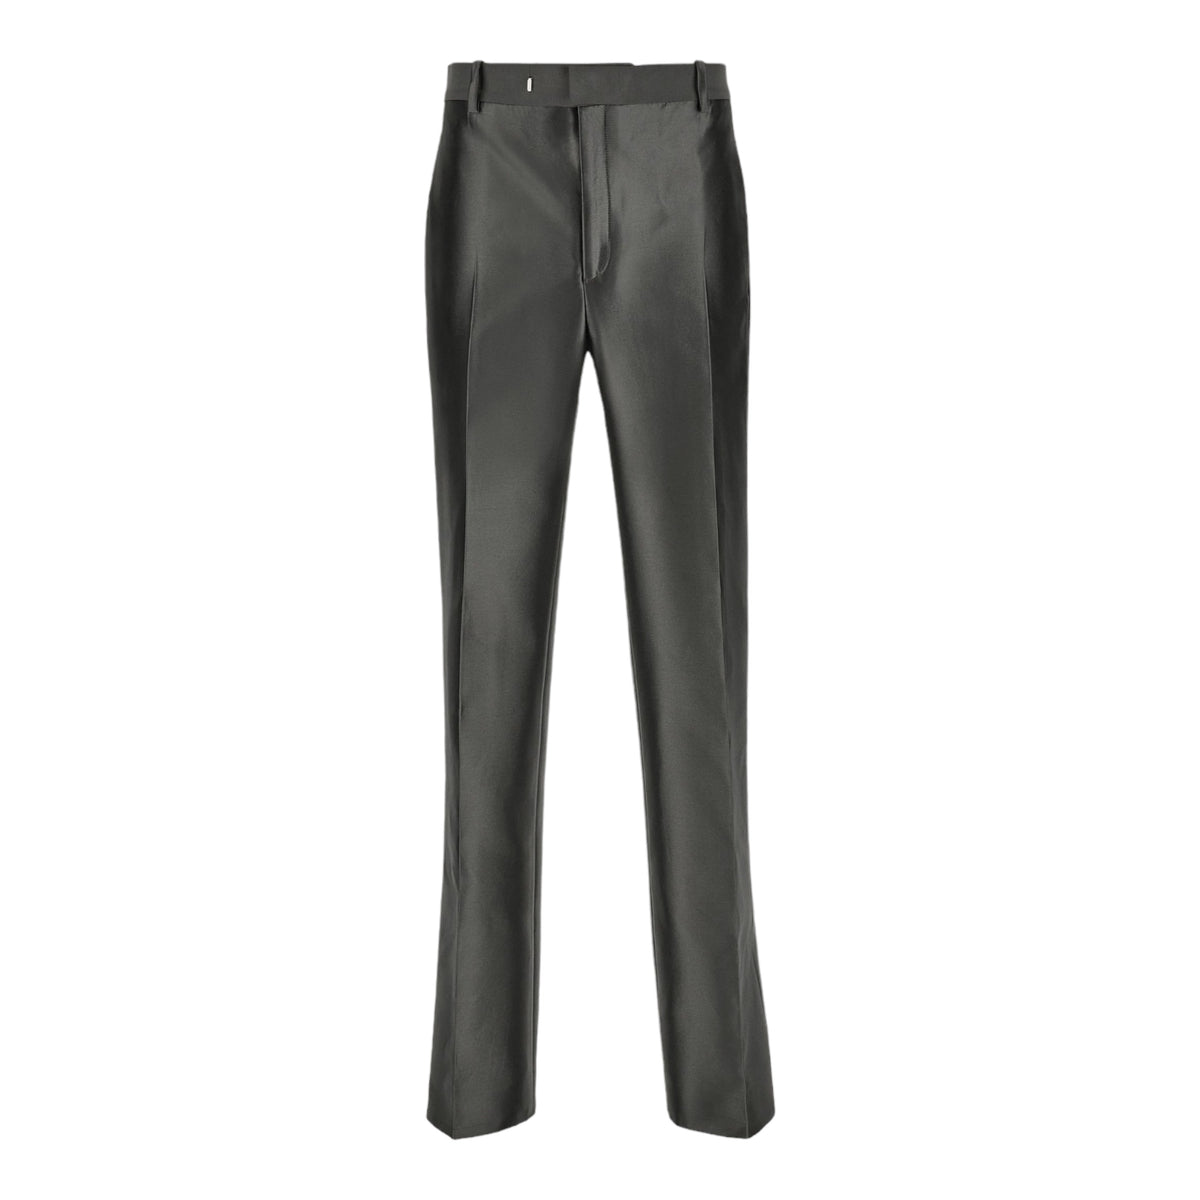 Flat front tailored trouser